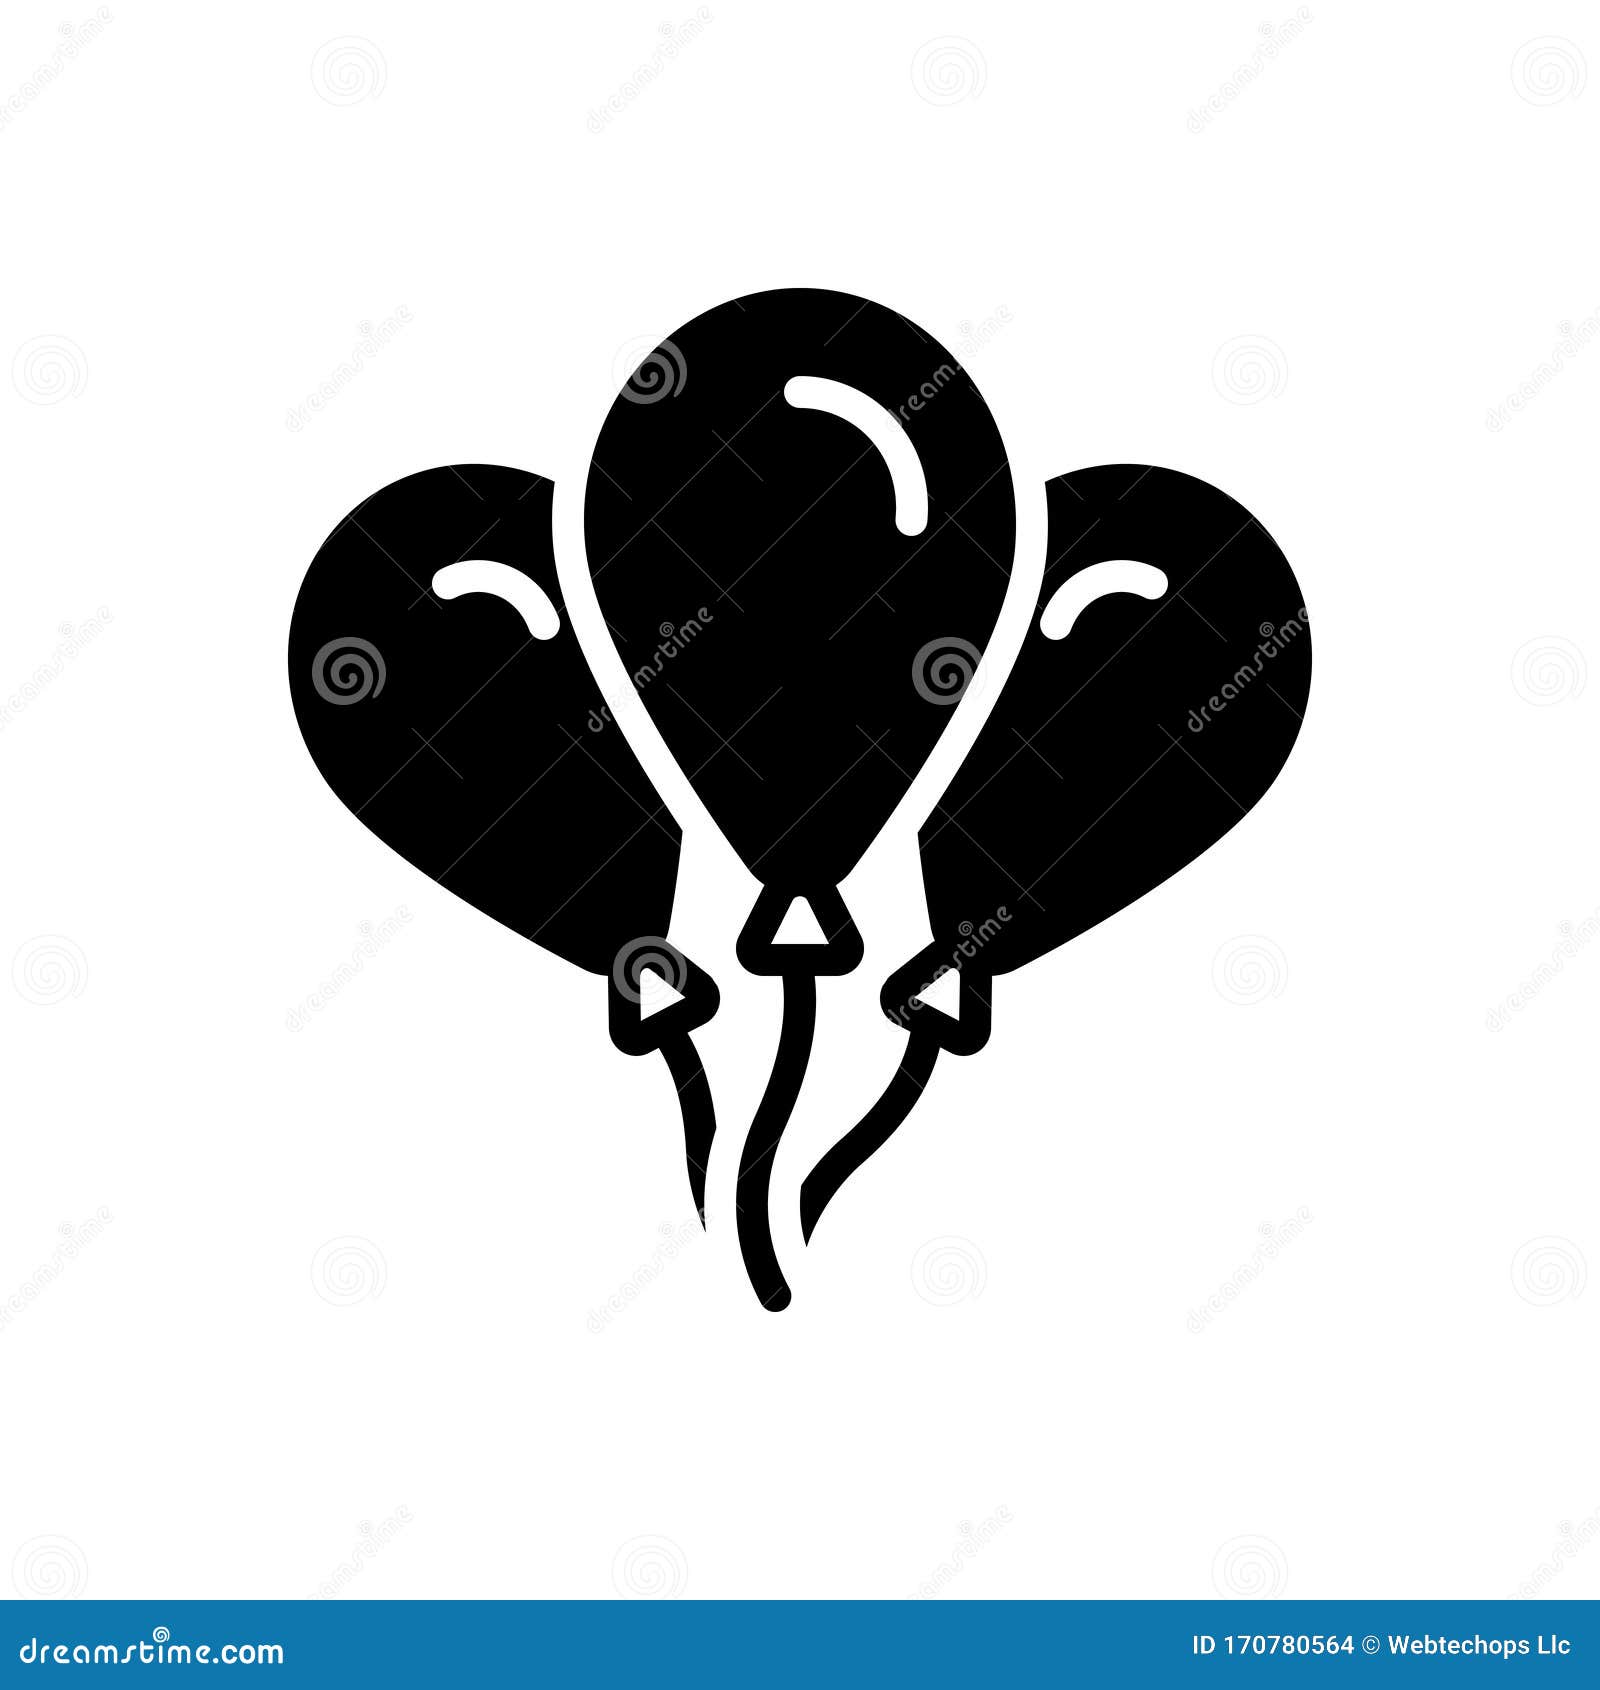 black solid icon for balloons, party and ballon